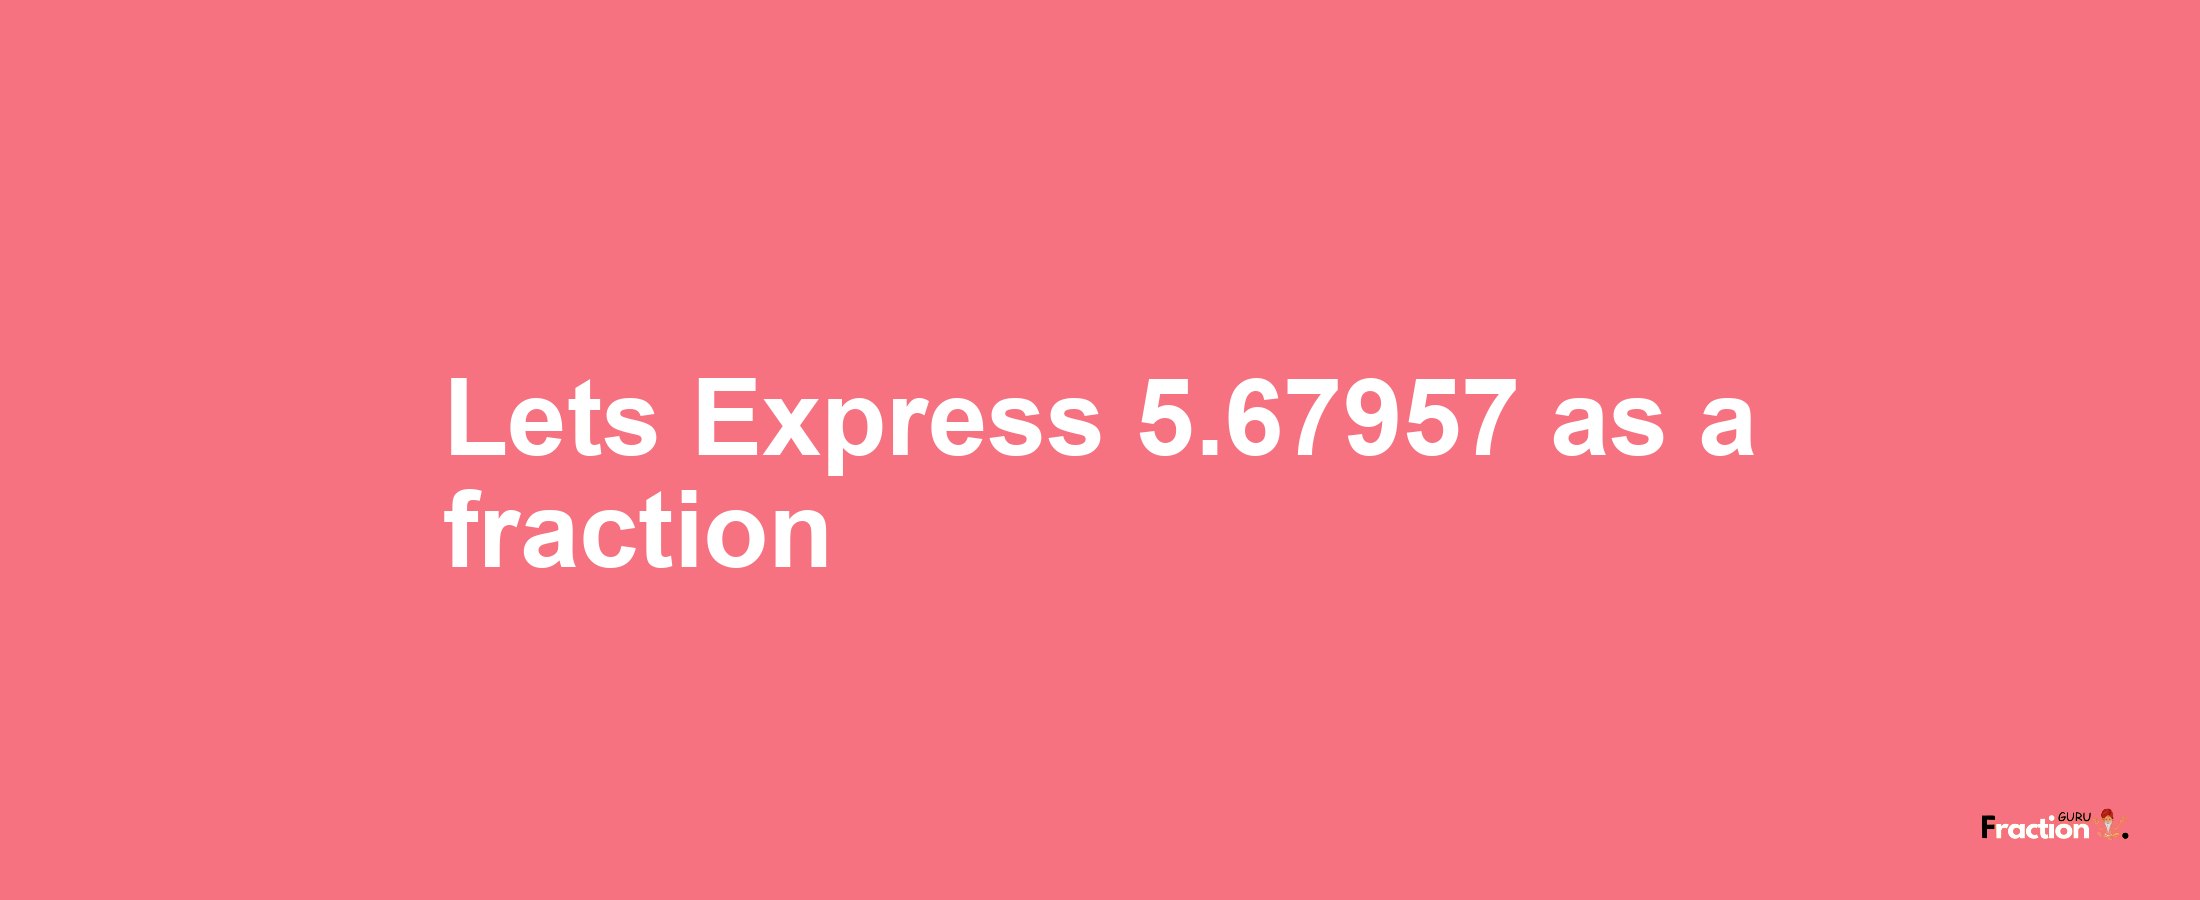 Lets Express 5.67957 as afraction